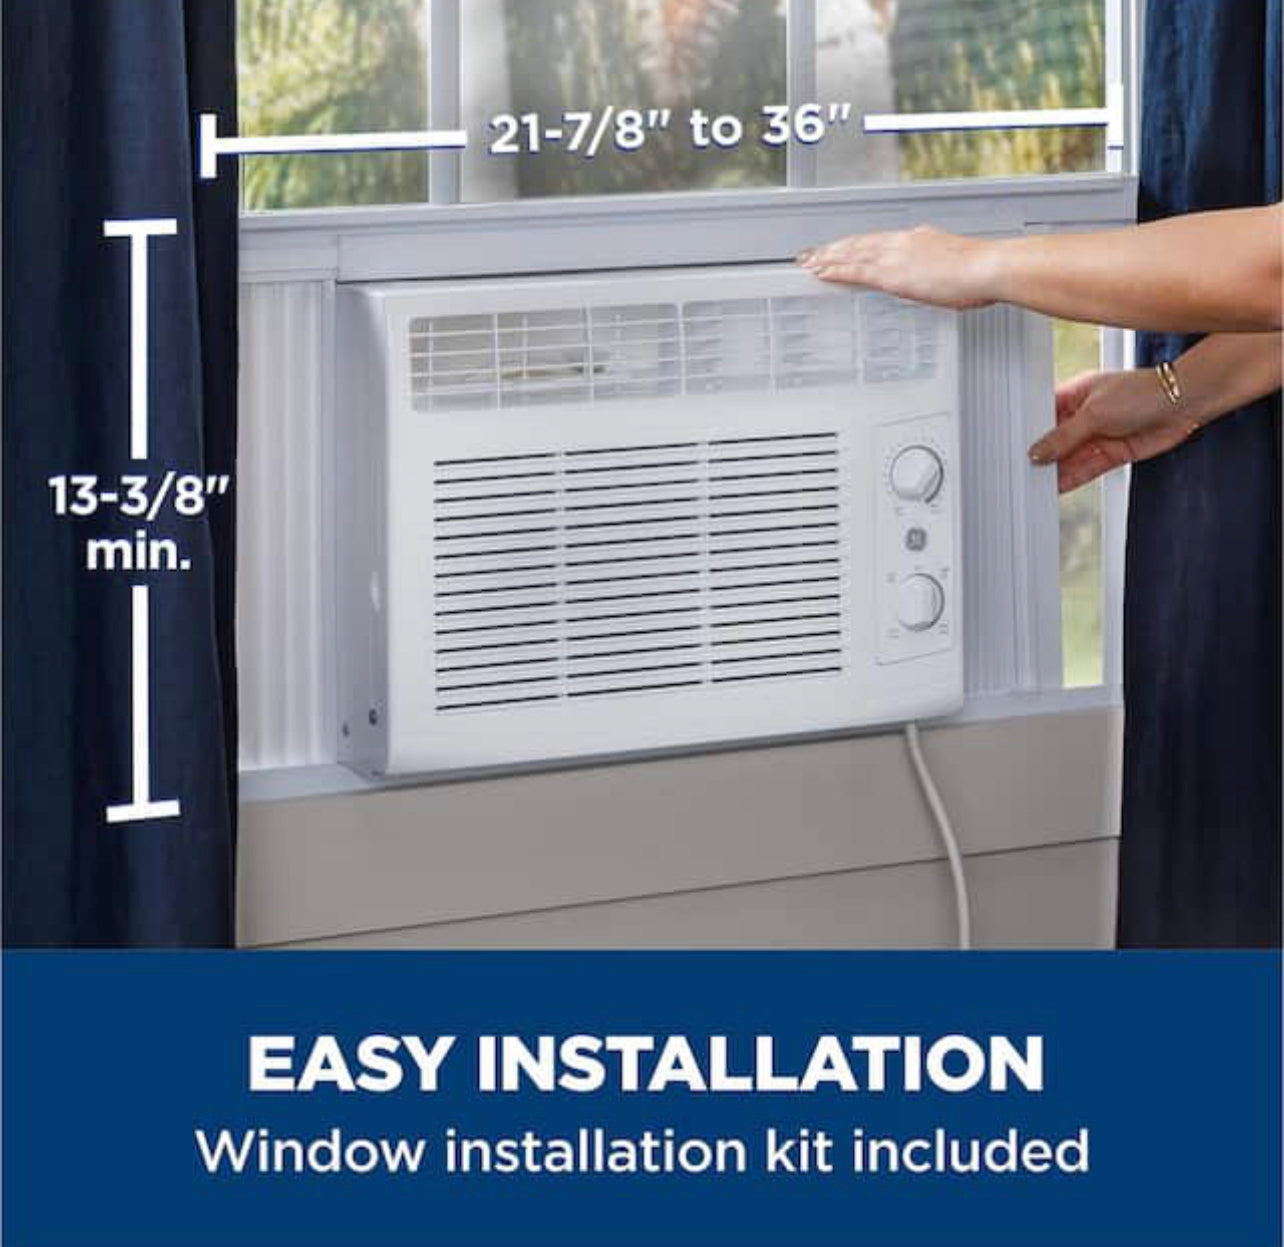 GE 5,000 BTU 115-Volt Window Air Conditioner for Bedroom or 150 sq. ft. Small Rooms in White, Included Install Kit Discount Bros, LLC.